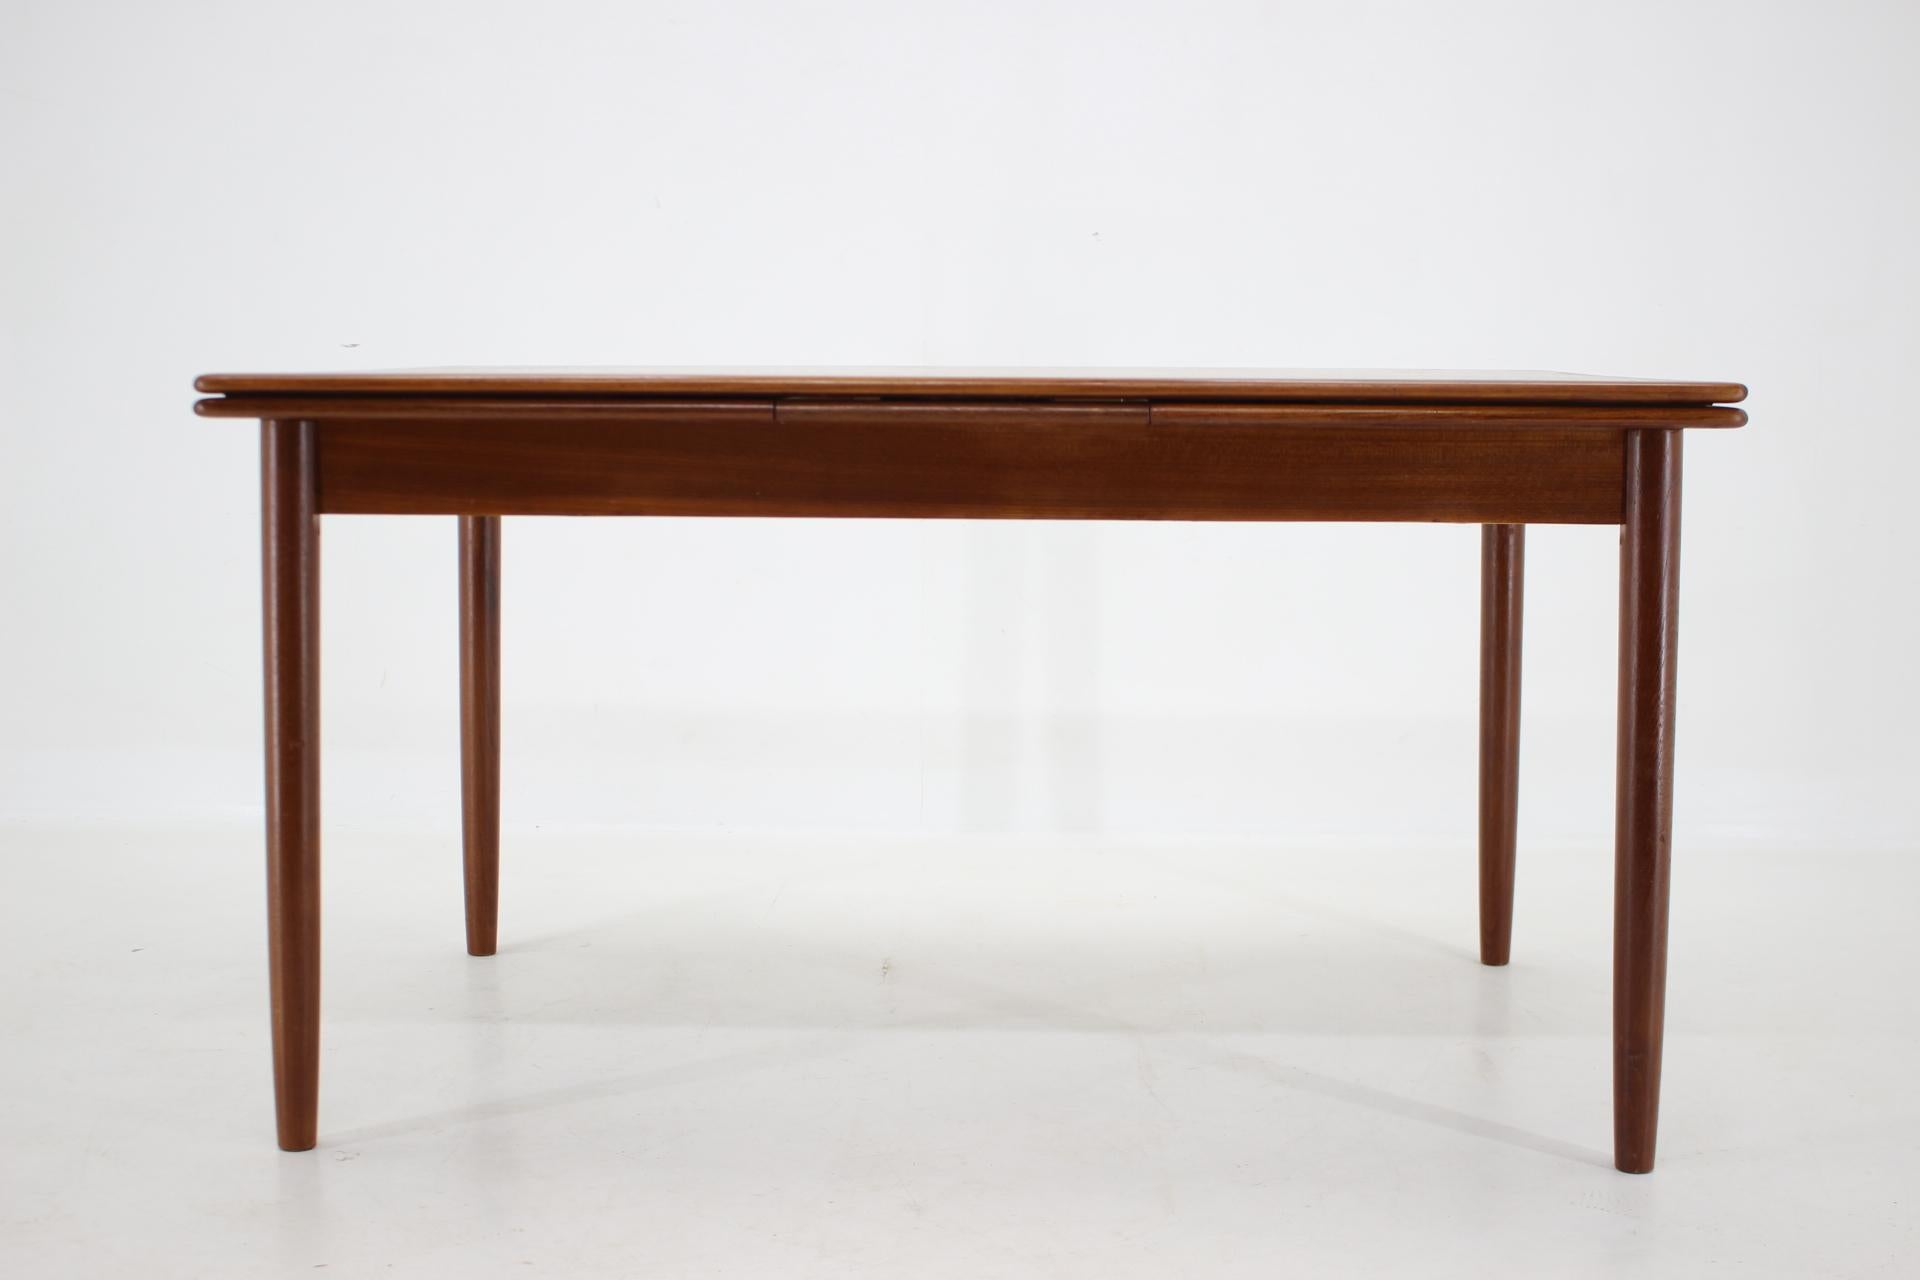 - Newly veneered
- Carefully refurbished   
- dimensions of the unfolded table: 140-246cm